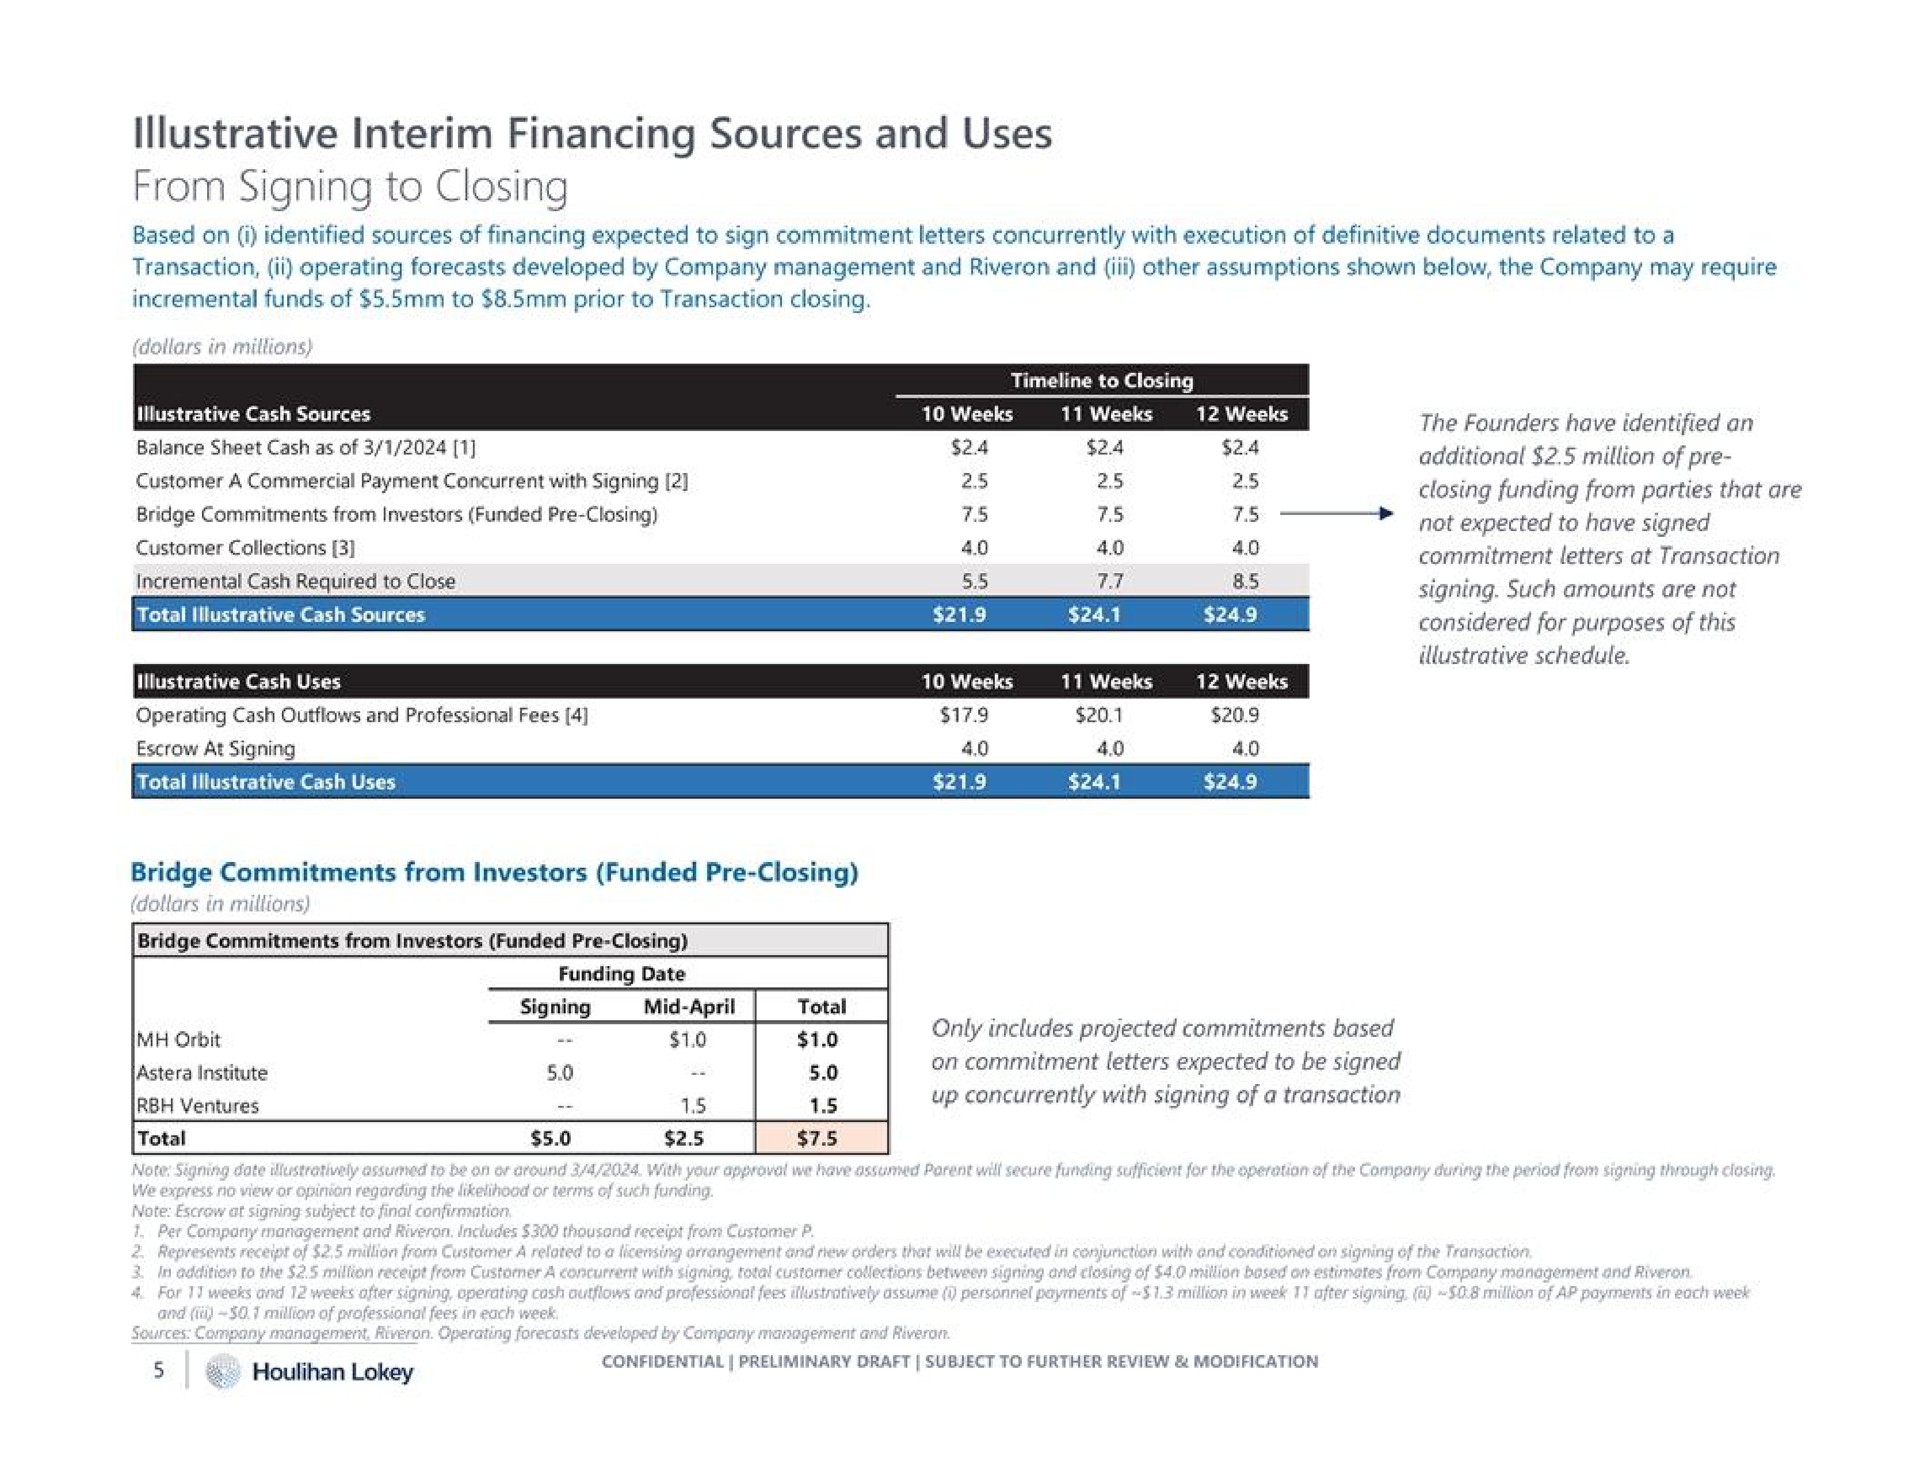 illustrative interim financing sources and uses from signing to closing | Houlihan Lokey